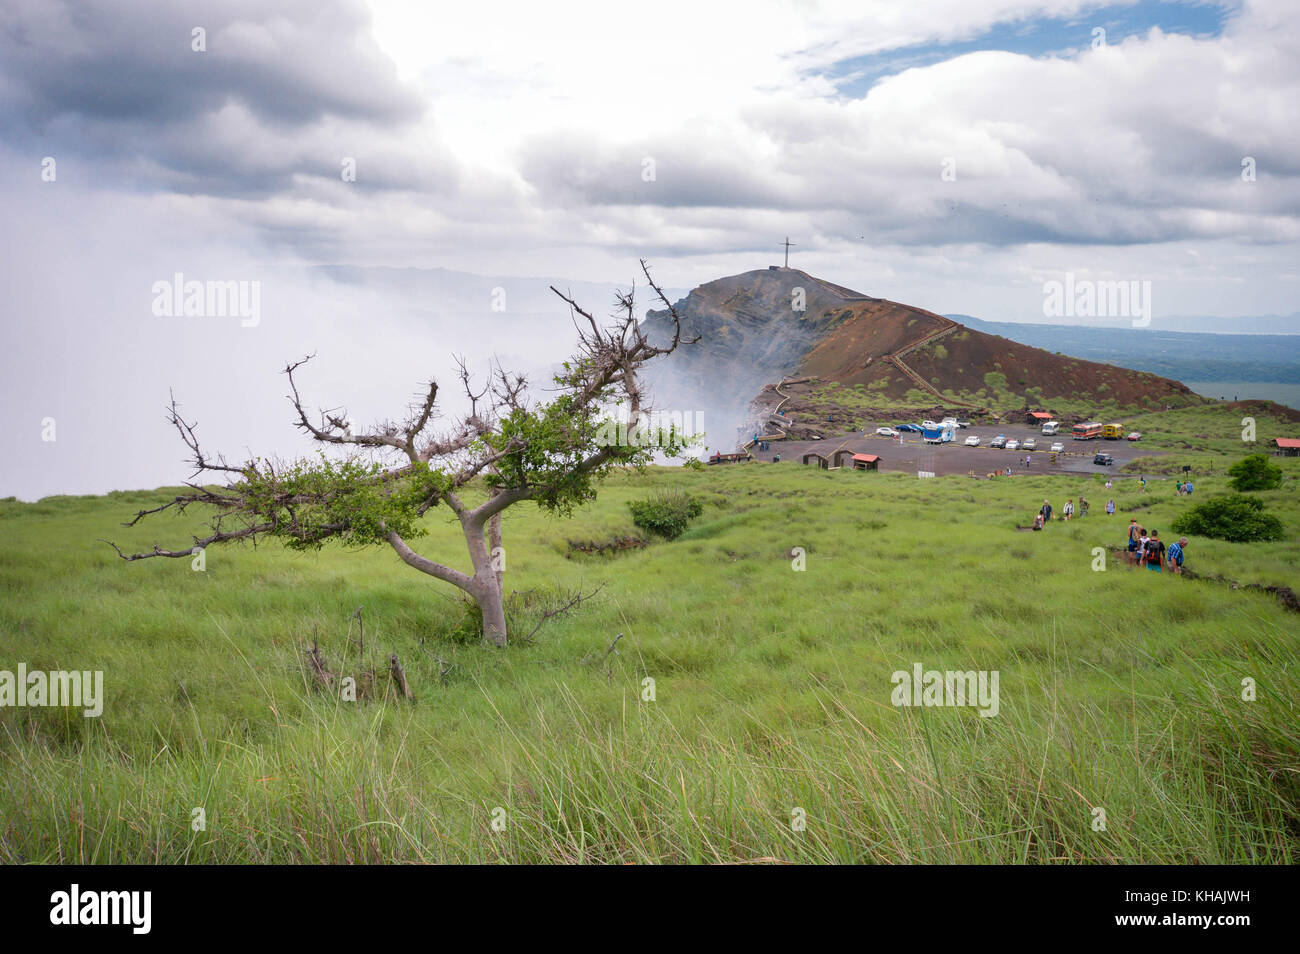 Volcanic landscape of one of the Masaya volcano fuming craters. Masaya, Nicaragua, Central America Stock Photo